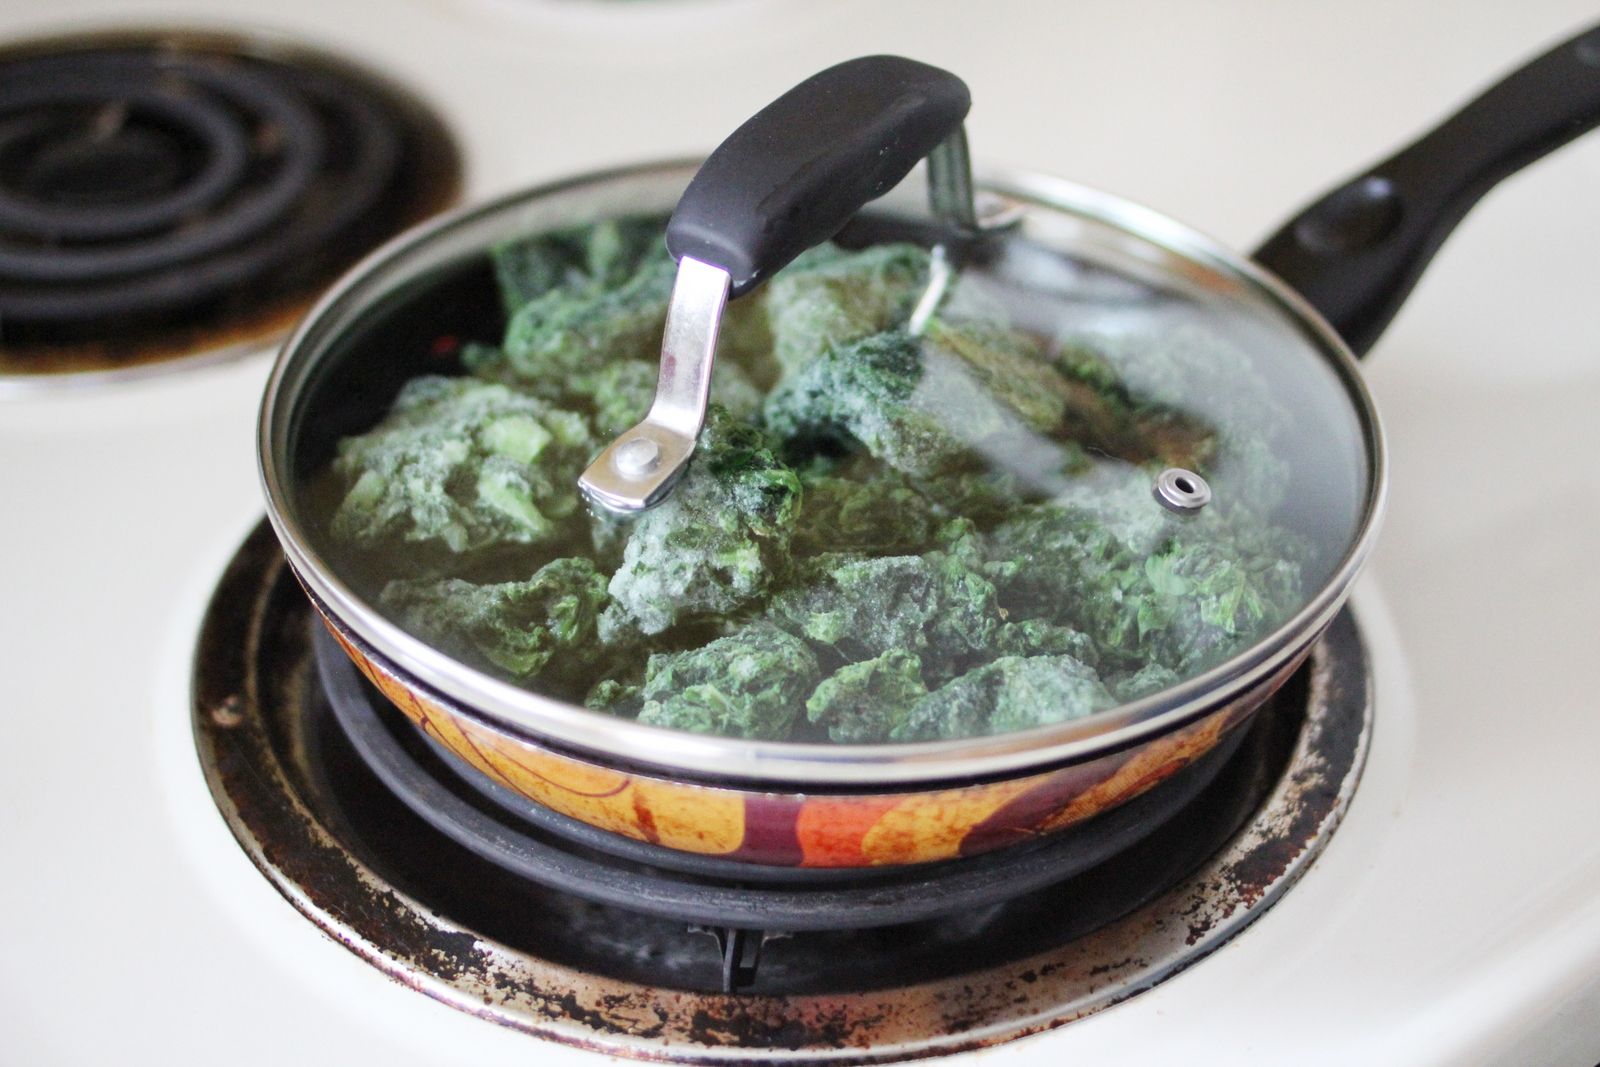 Lightly coat your pan with olive oil. Put spinach in on medium heat and